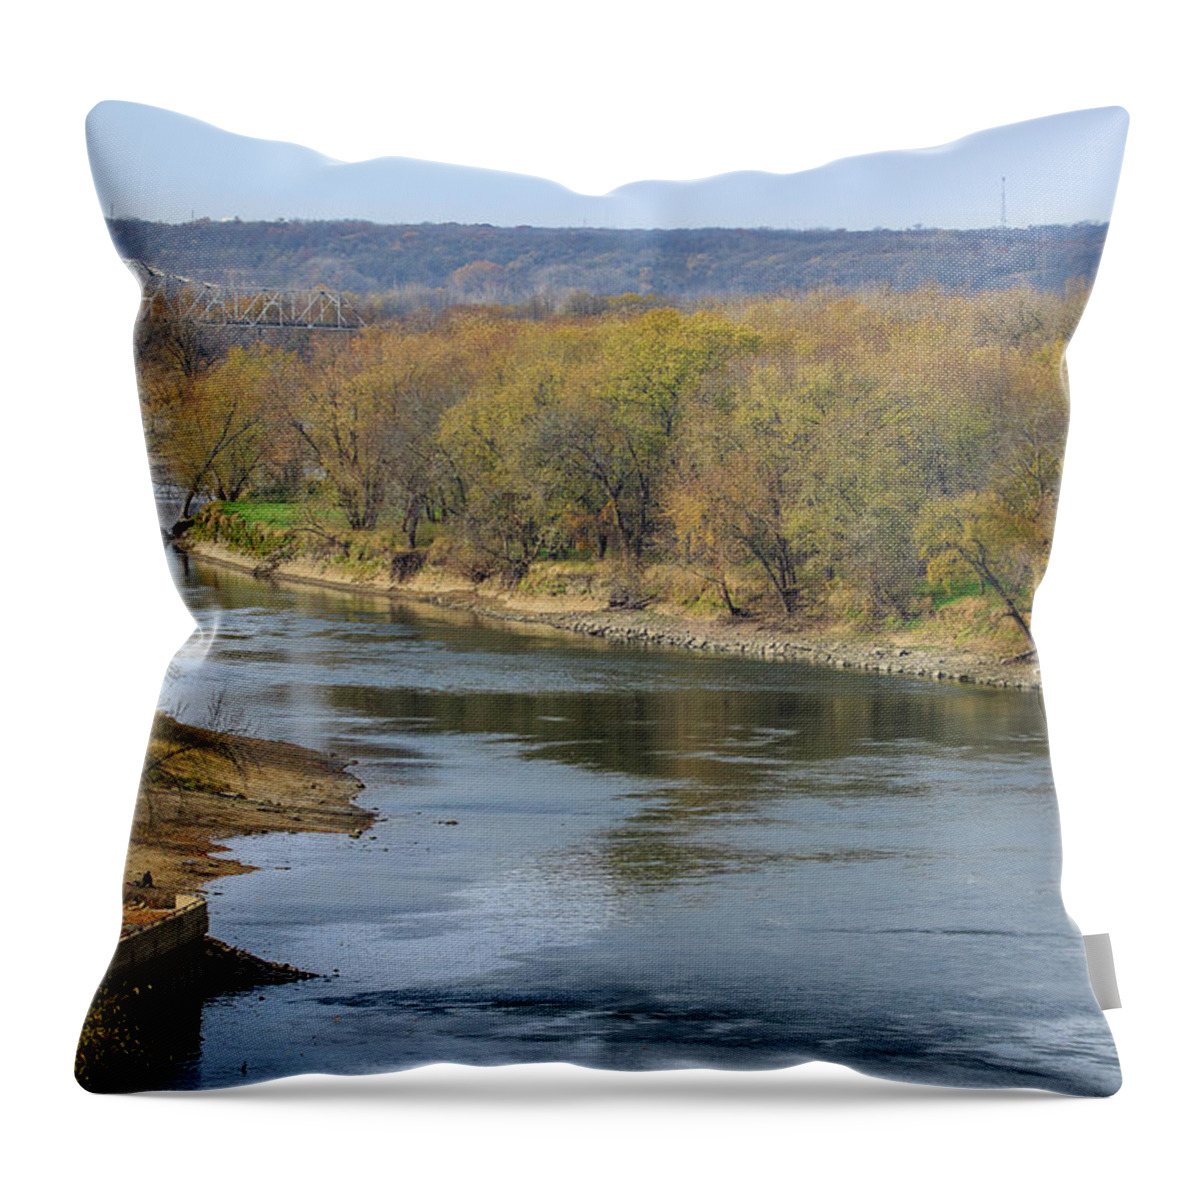 Illinois River Throw Pillow featuring the photograph Illinois River at Starved Rock by Joni Eskridge